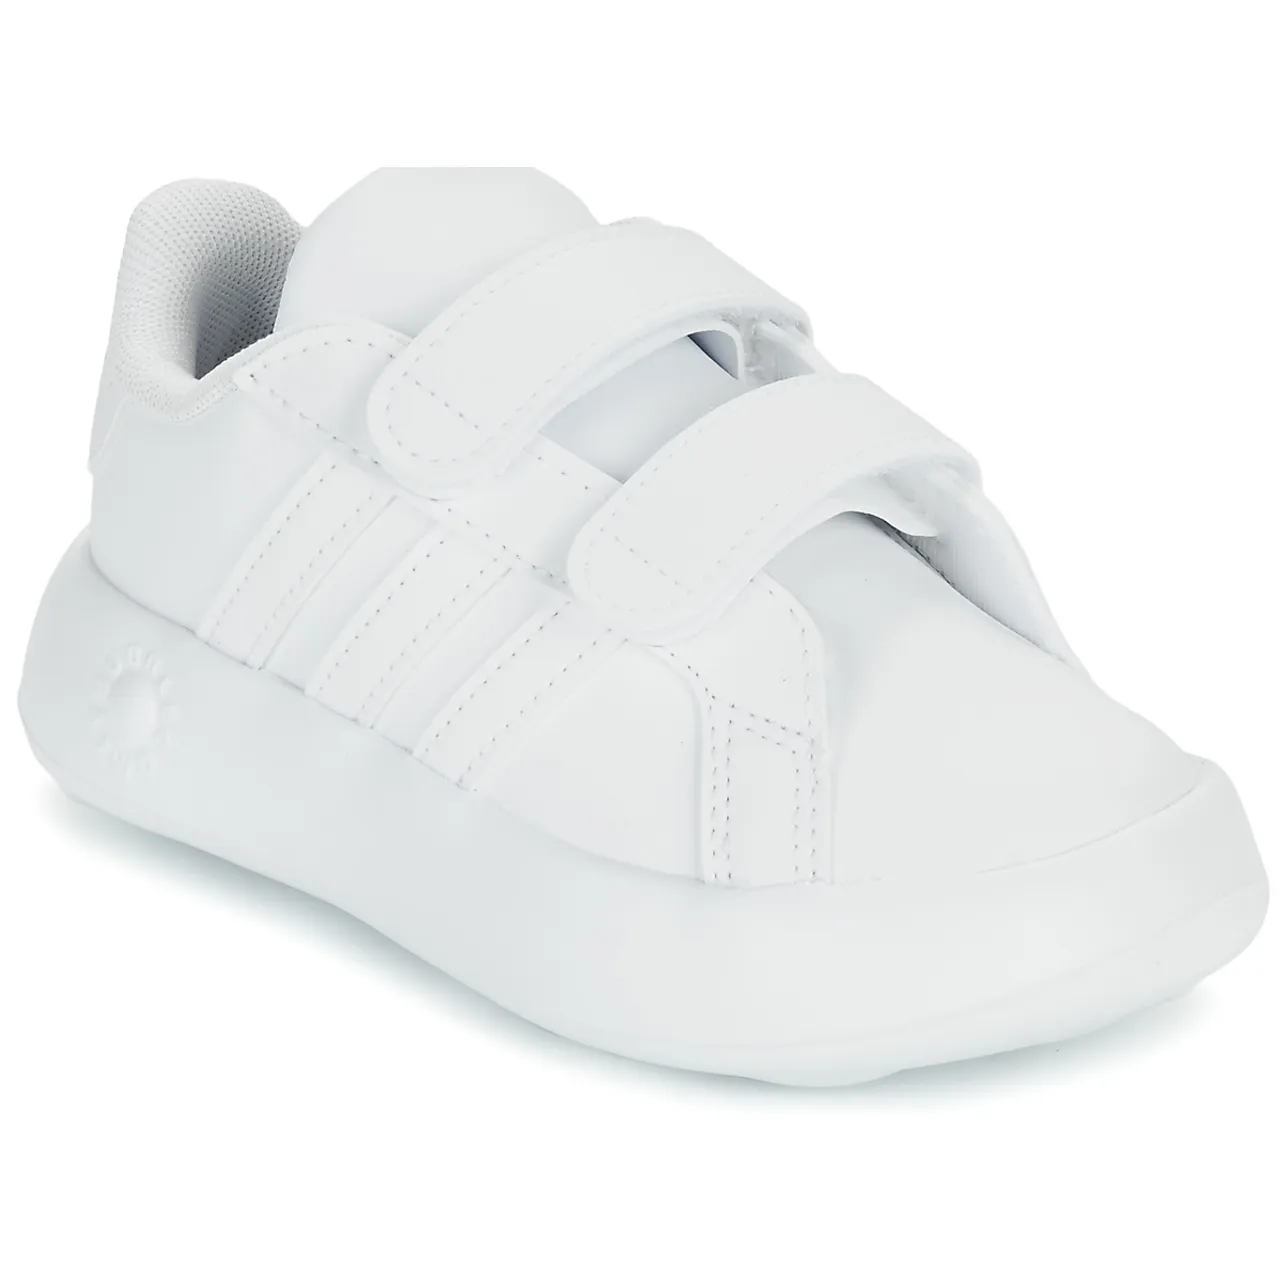 adidas  GRAND COURT 2.0 CF I  boys's Children's Shoes (Trainers) in White